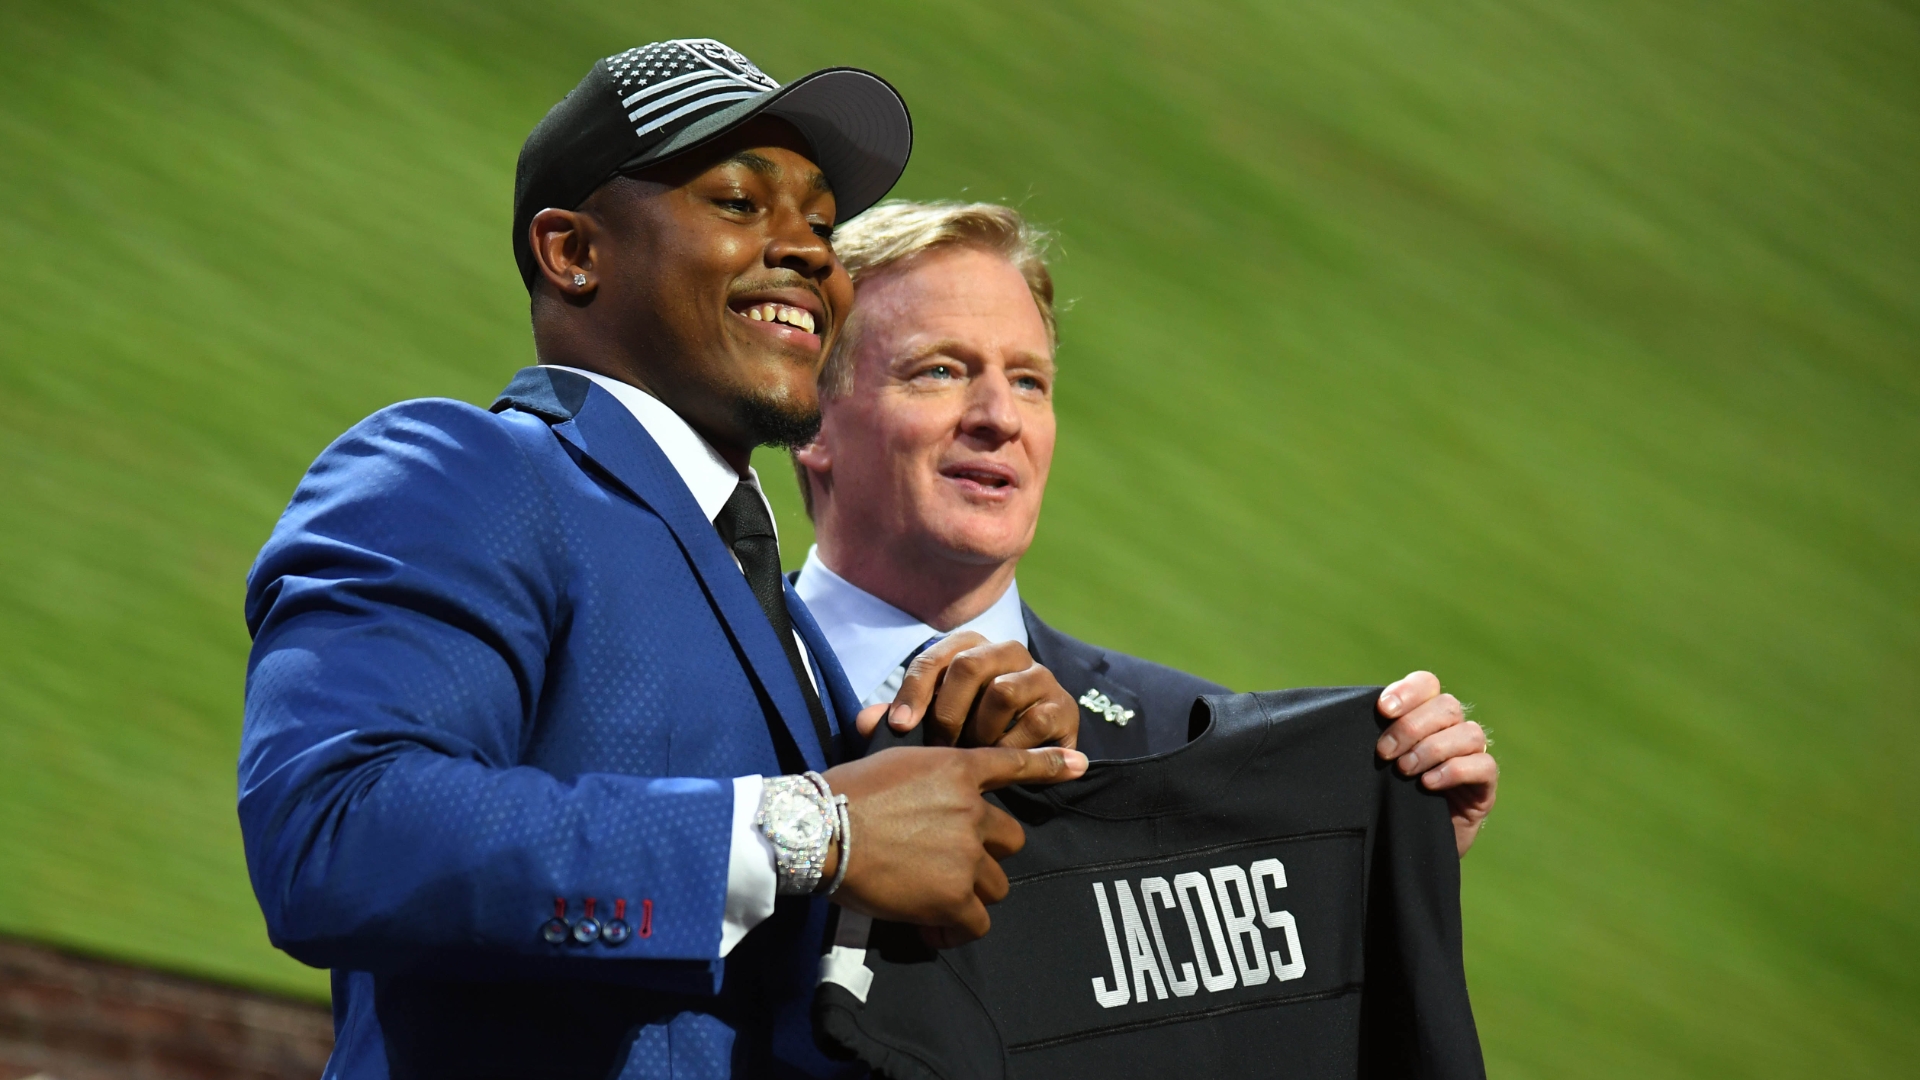 SC Featured: Josh Jacobs' journey from homelessness to 1st-round pick